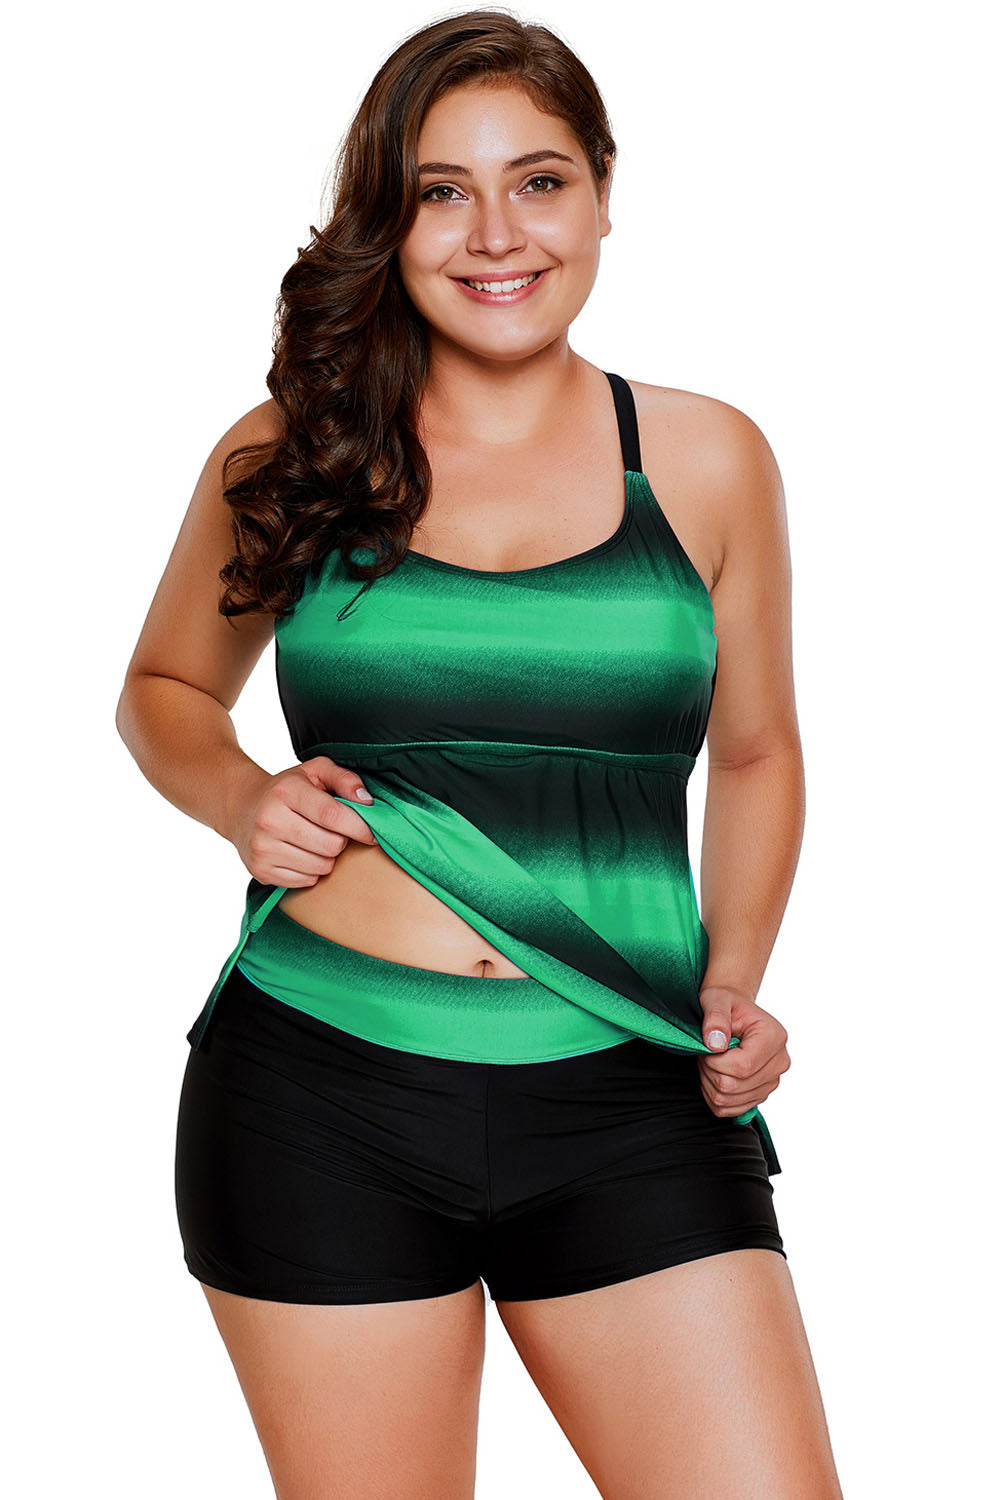 Greenish Strappy Hollow-out Back Plus Size Tankini